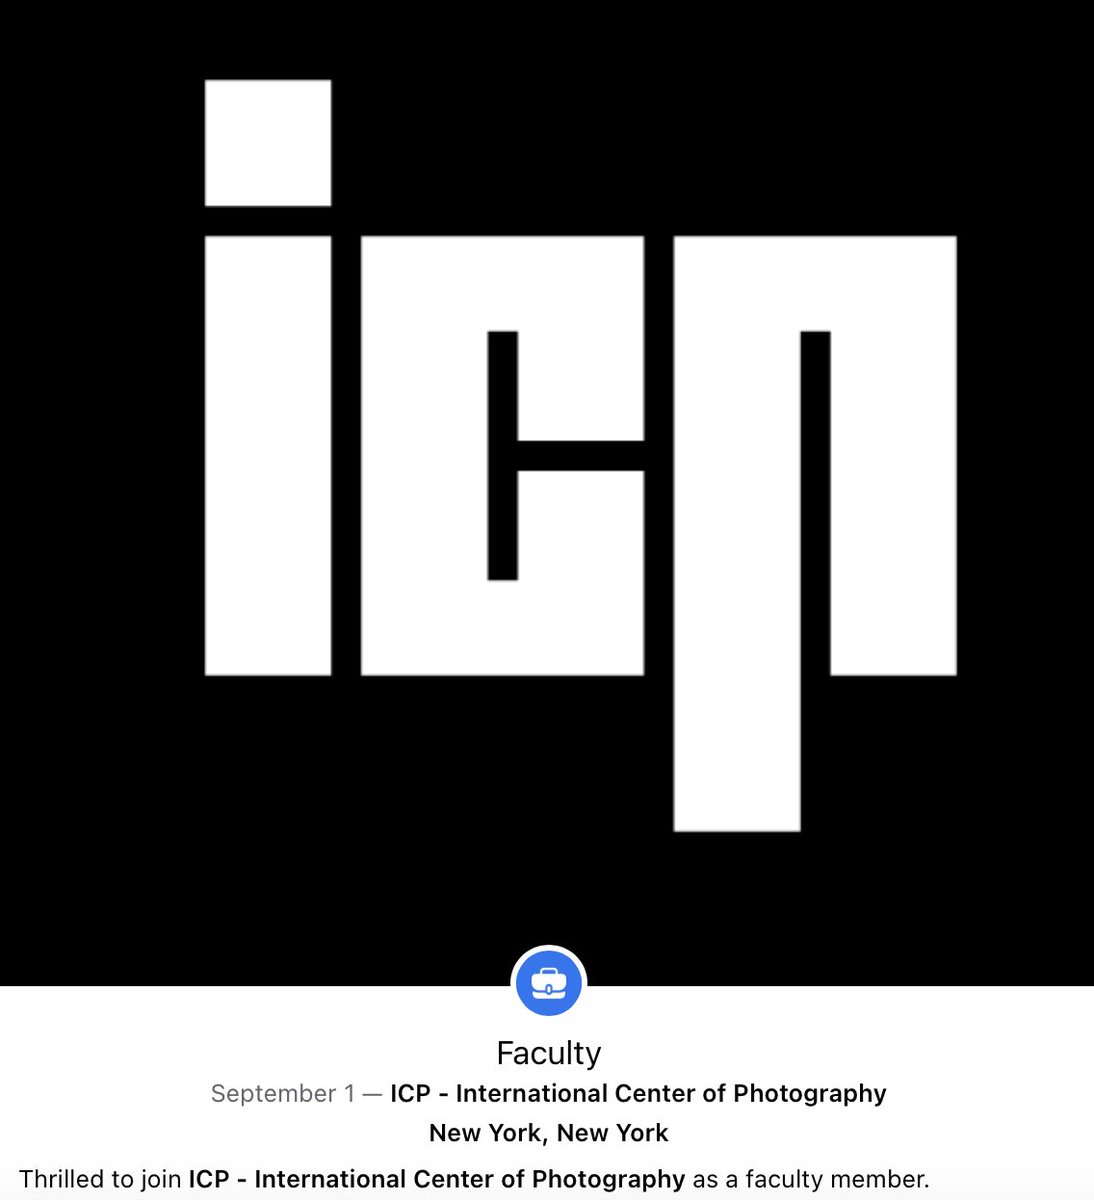 Thrilled to join @ICPhotog - International Center of Photography as a faculty member